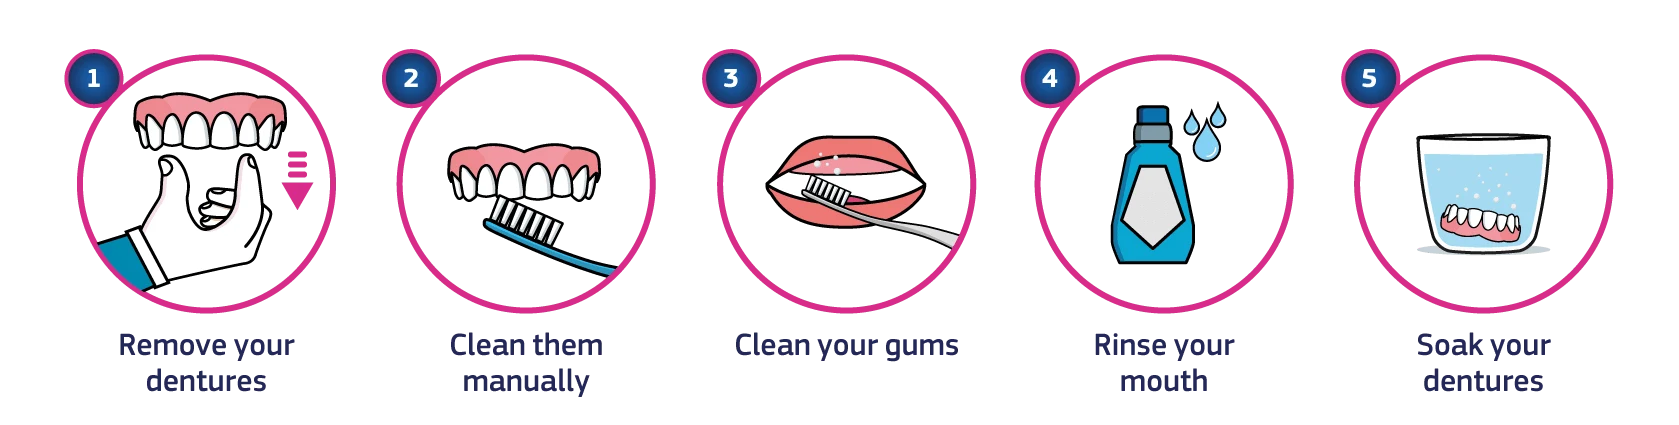 An infographic showing the step-by-step procedure on how to remove dentures: Step 1. Remove your dentures. Step 2. Clean them manually. Step 3. Clean your gums. Step 4. Rinse your mouth. Step 5. Soak your dentures. 